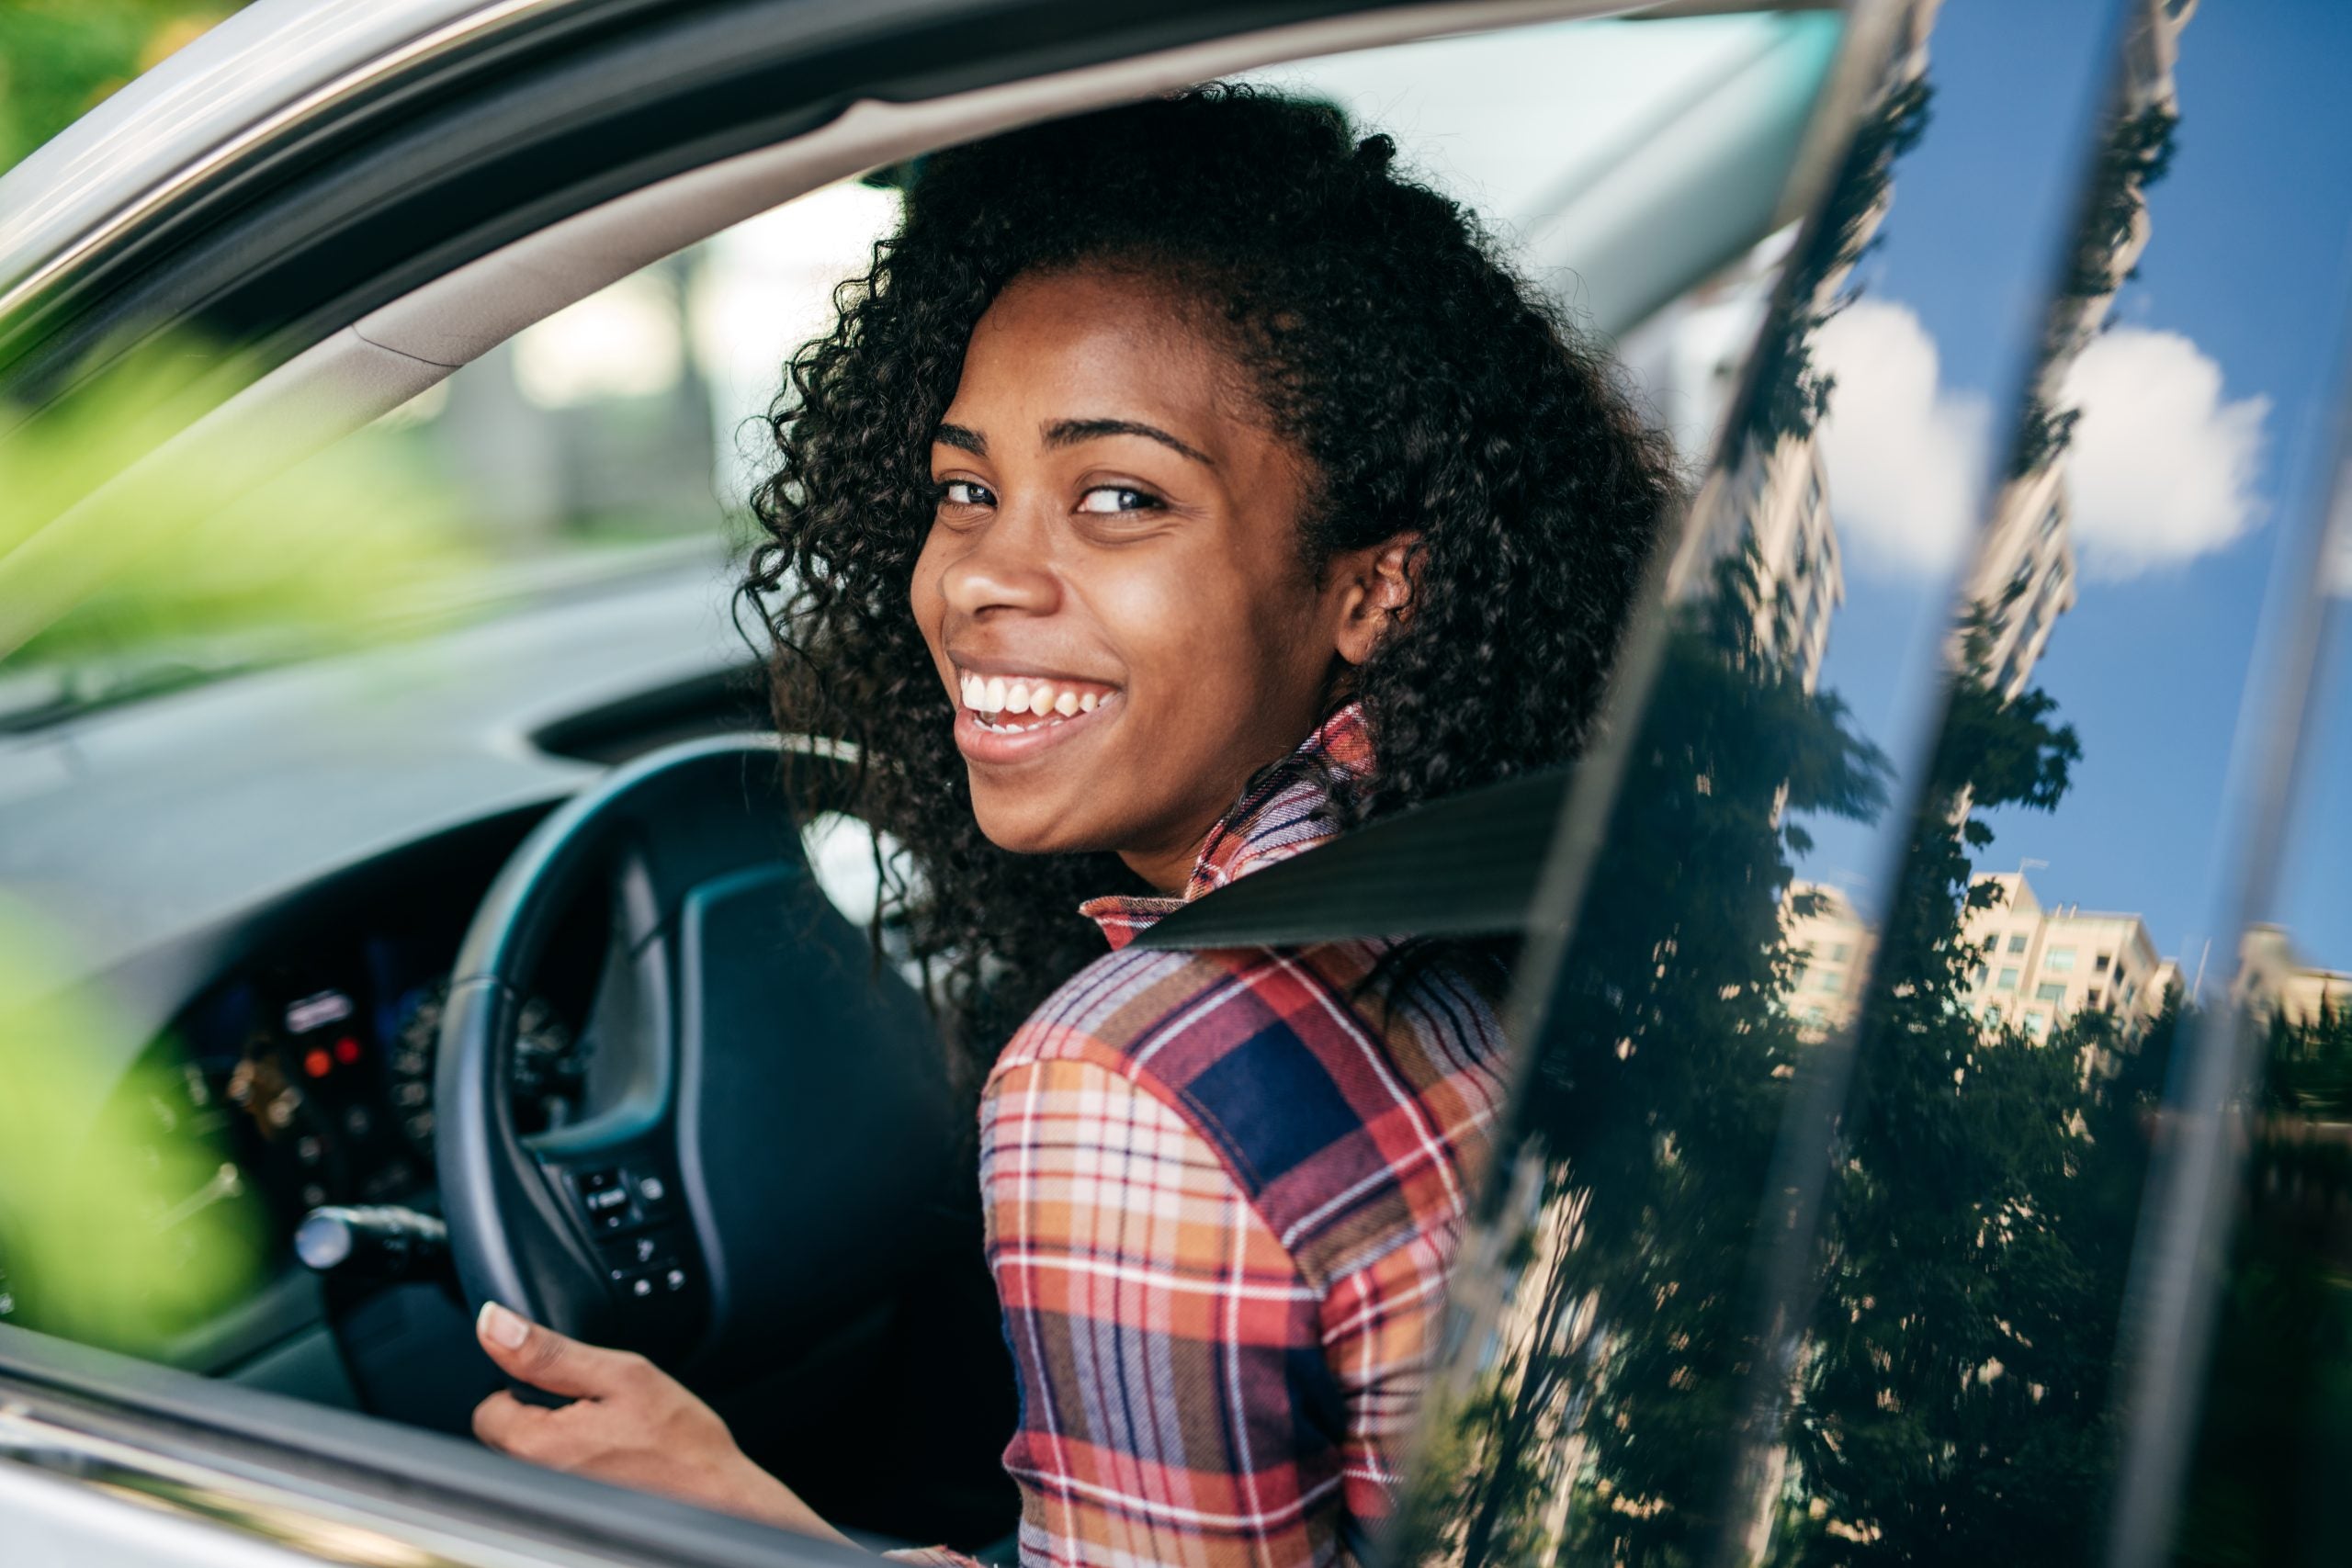 Goldman Sachs Gives $5M To ‘On The Road Lending,’ A Non-Profit That Helps Black Women Secure Low Interest Car Loans